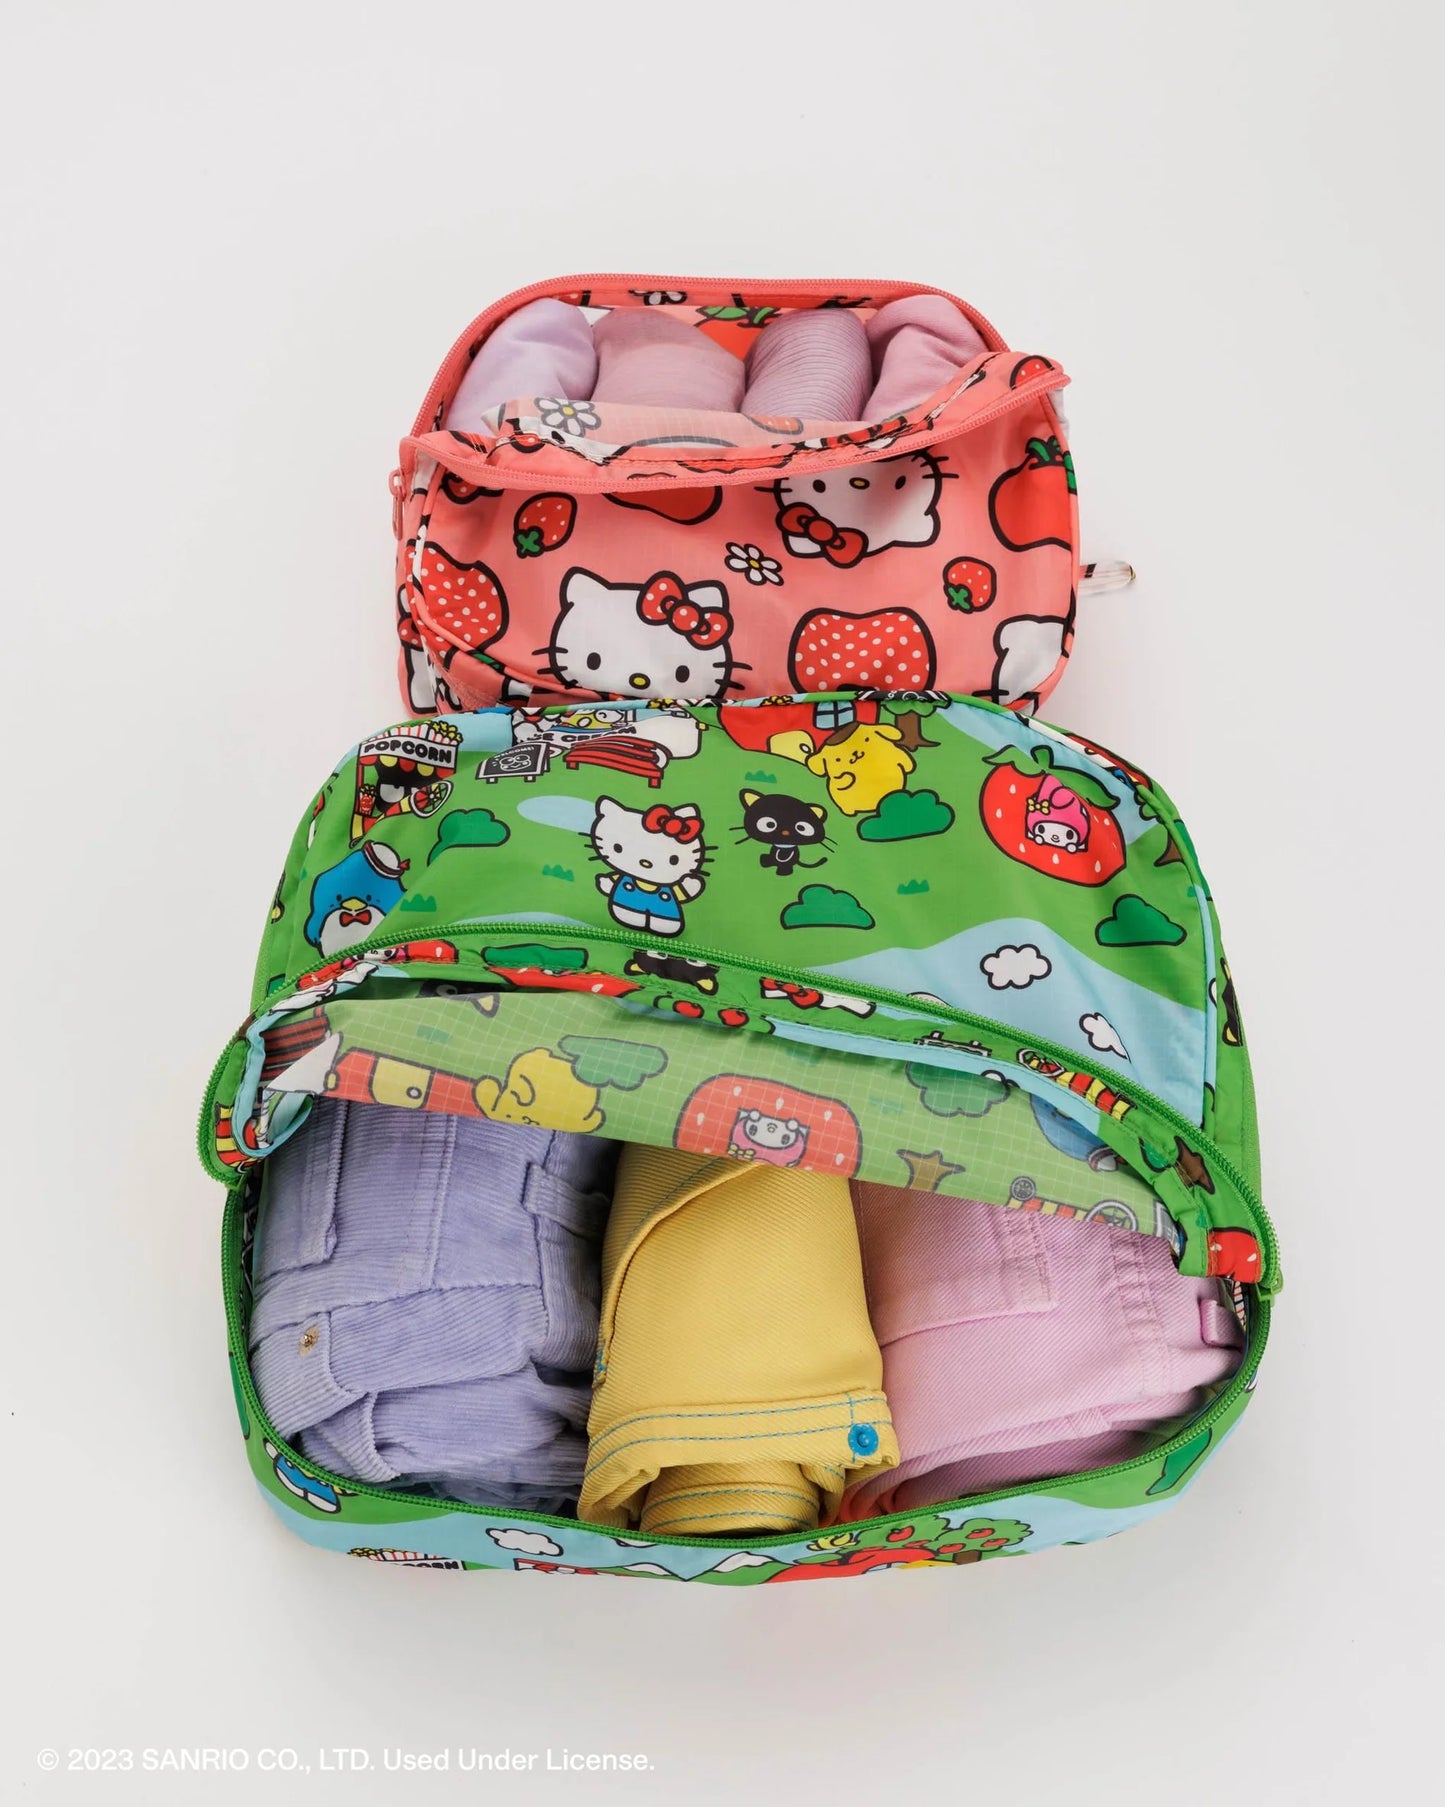 Baggu Packing Cube Set - Hello Kitty and Friends